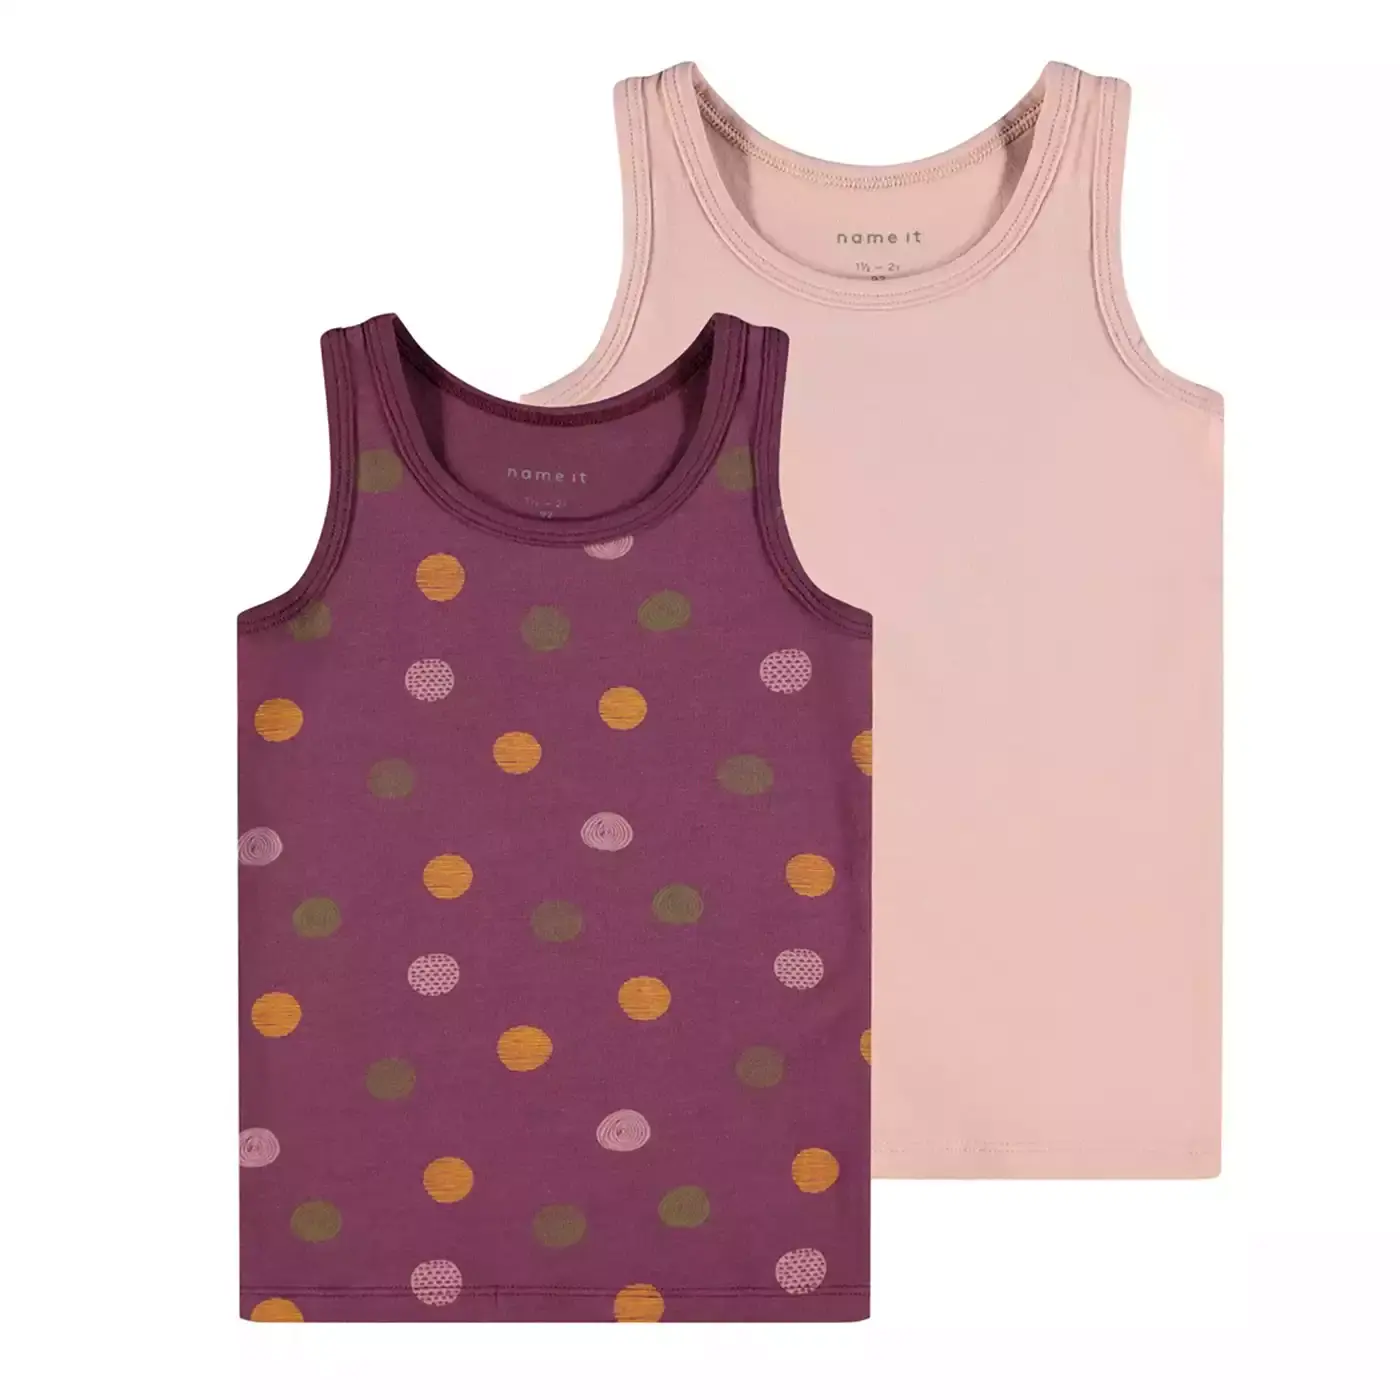 2er-Pack Tank Top Purple name it Rosa Pink Lila M2000580517002 3